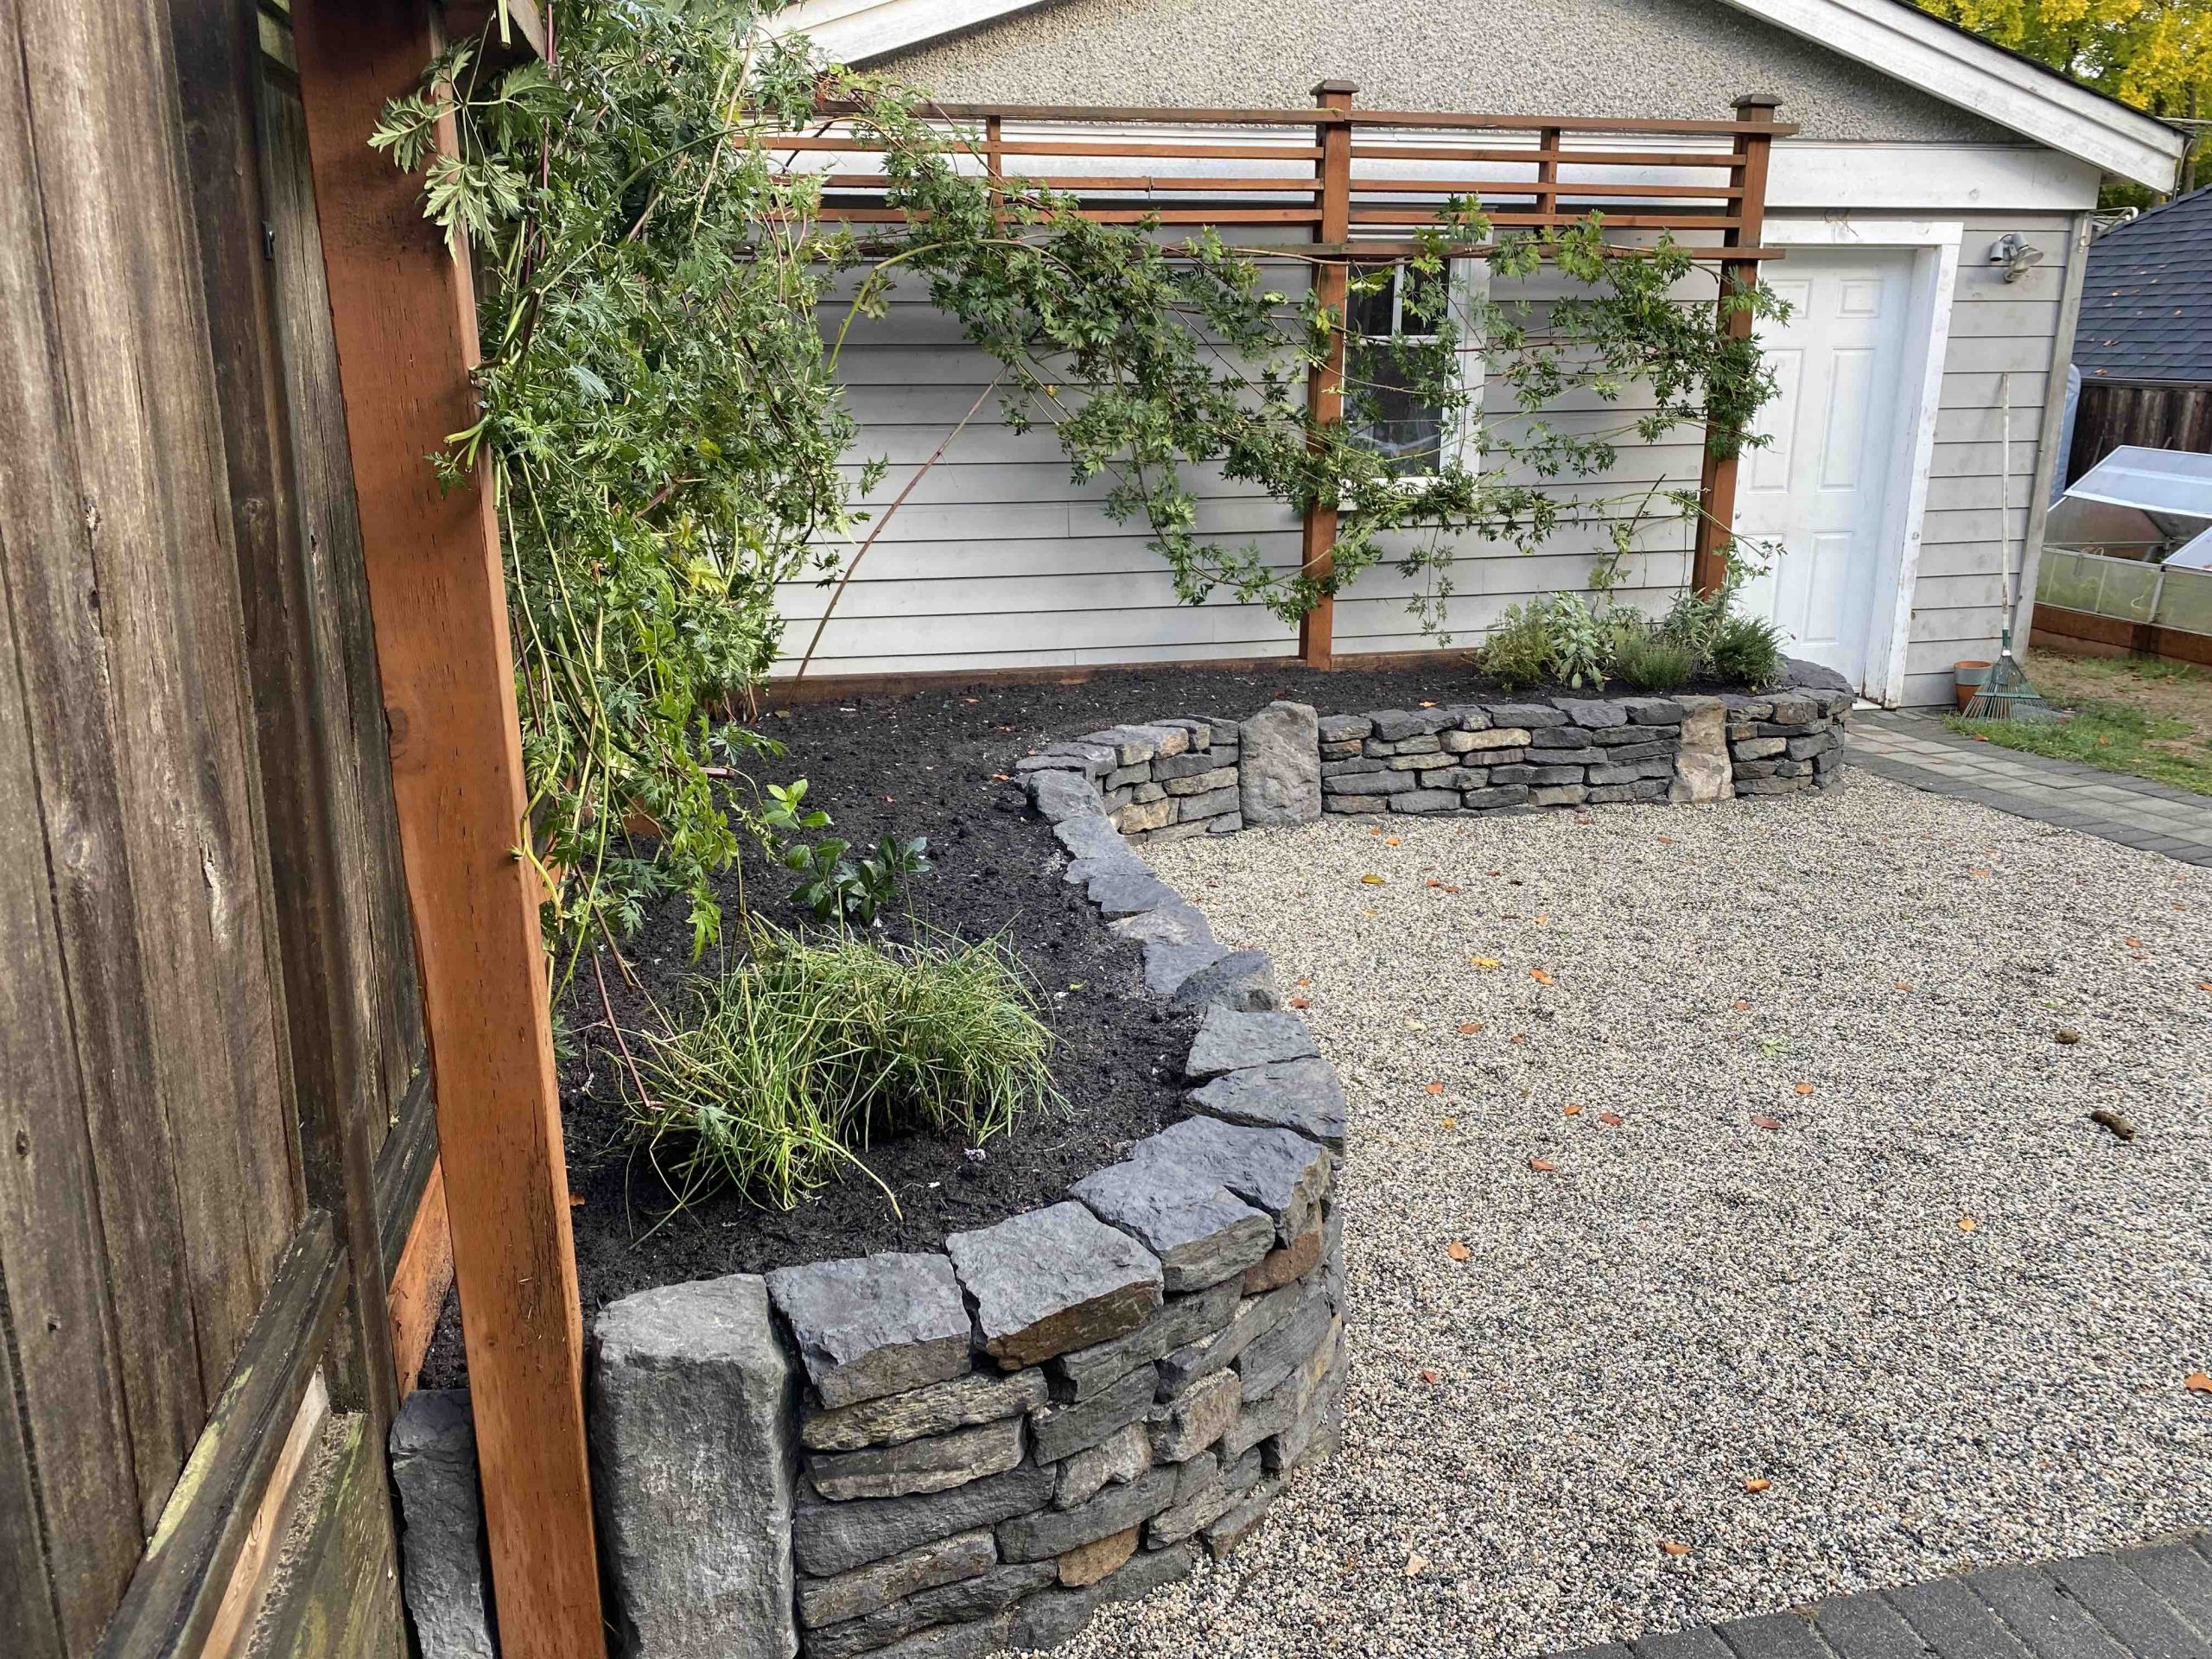 Dry stack Basalt rock wall in Vancouver backyard with French style gravel patio. Features Basalt columns integrated into the garden rock walls and a custom blackberry trellis